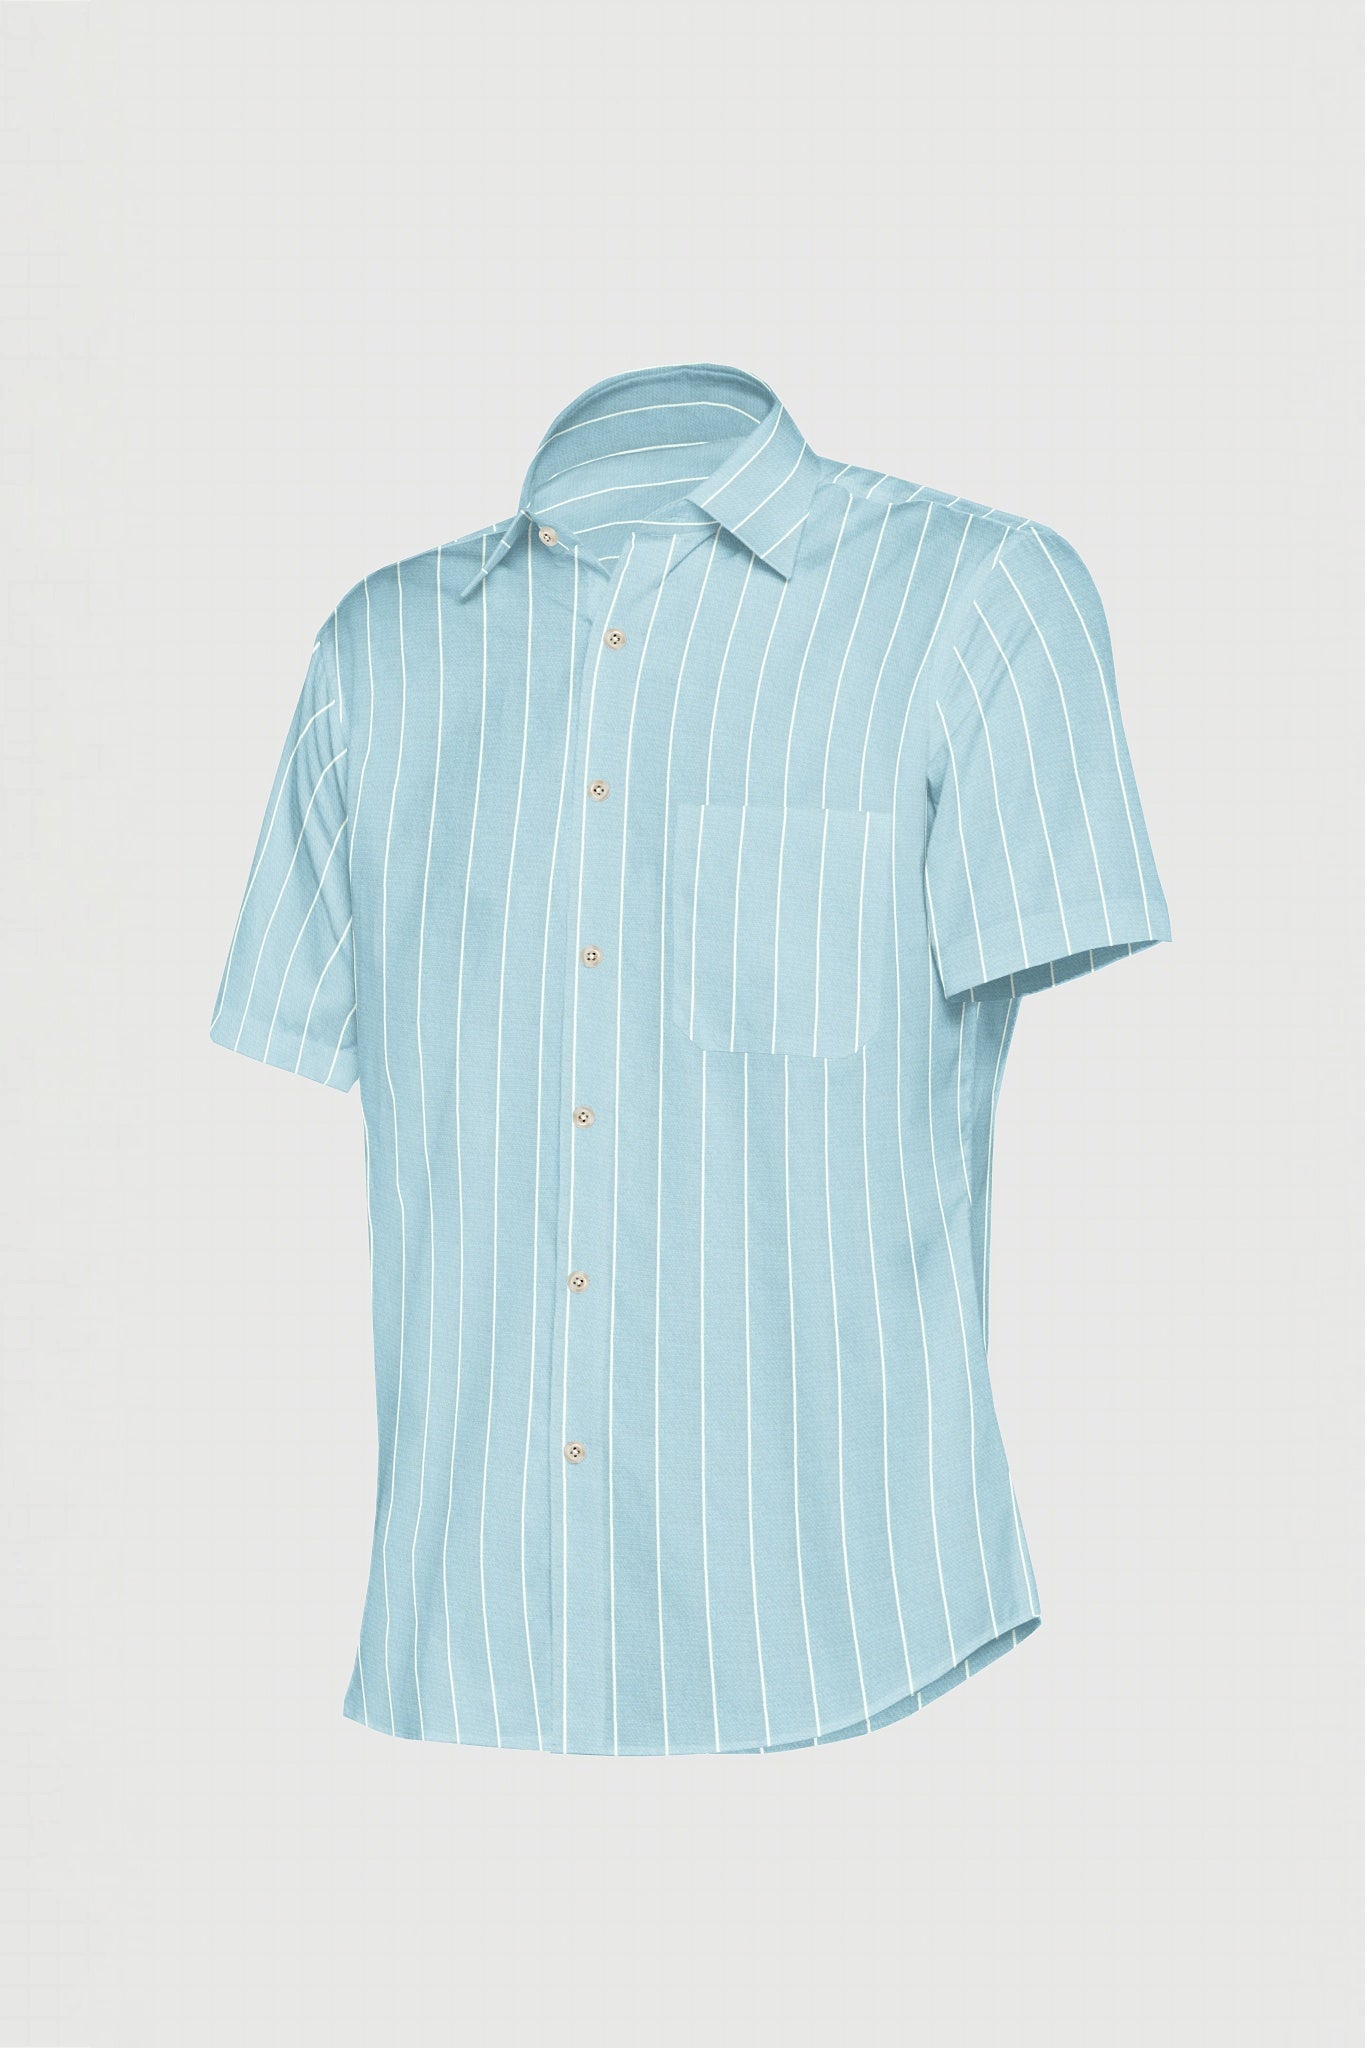 Blizzard Blue and White Wide Pinstripes Cotton Linen Shirt